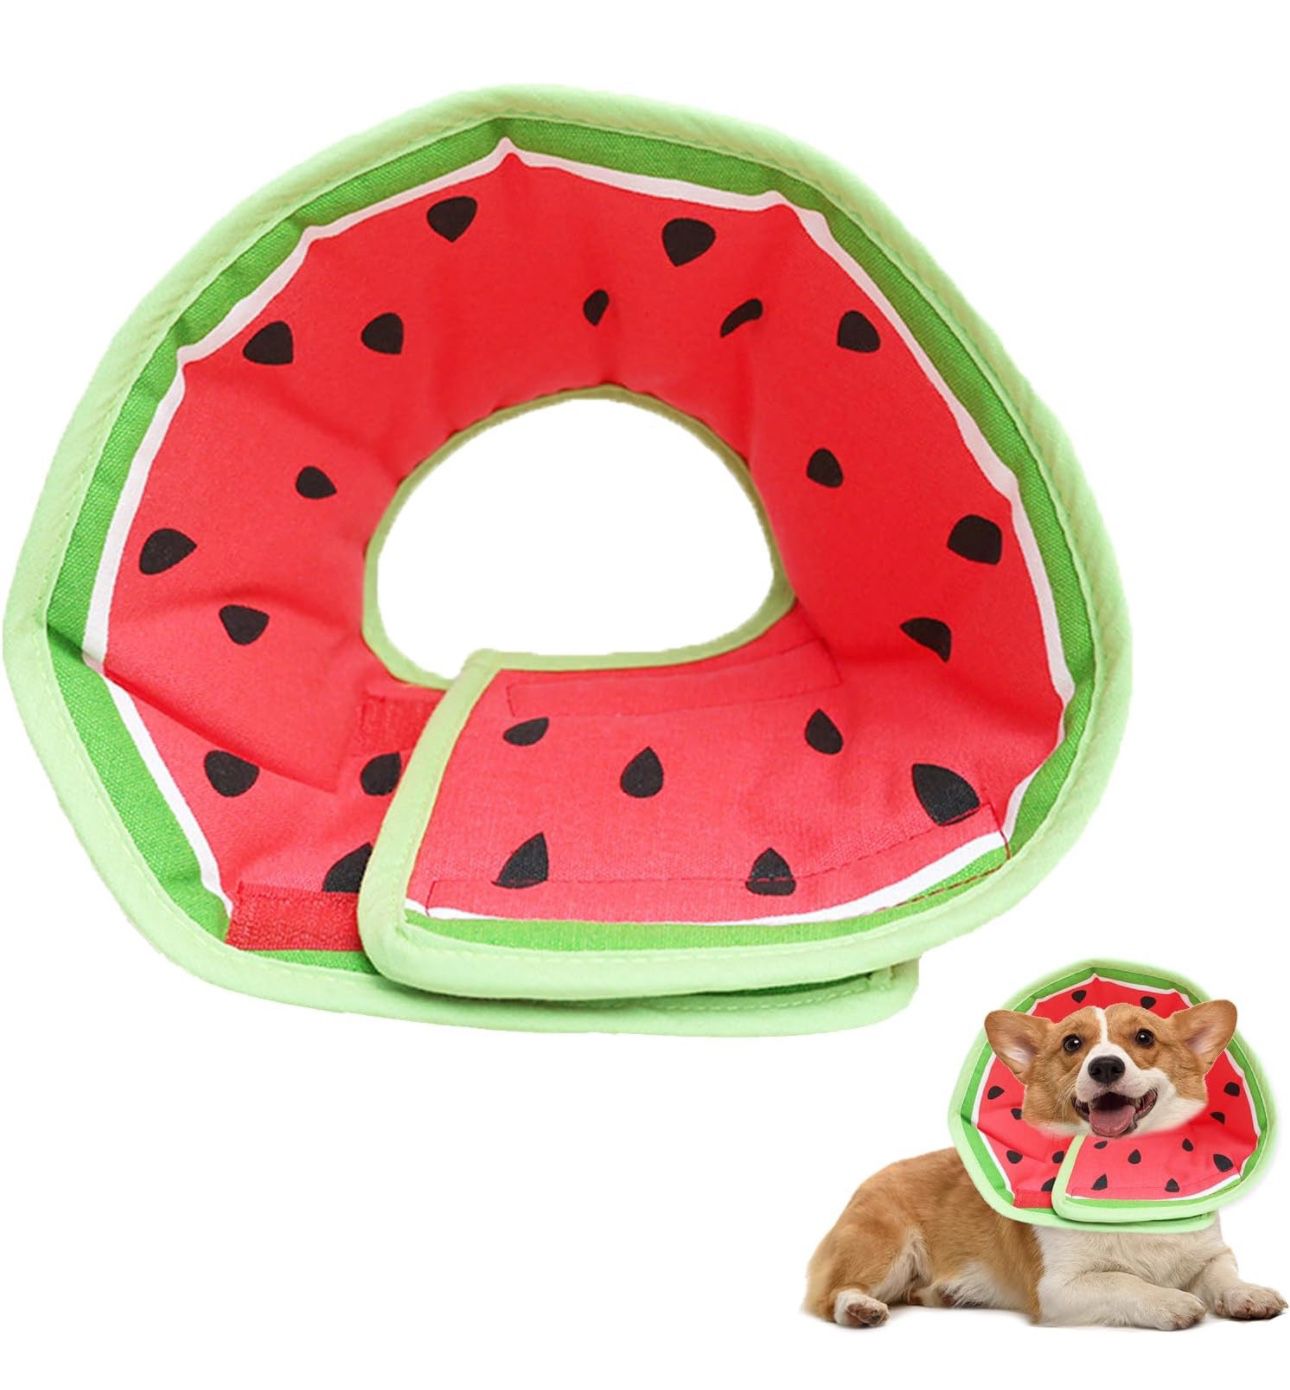 Soft Dog Cone Collar for Dogs After Surgery, Adjustable Dog Recovery Cone Collar for Medium Small Puppy Dogs and Cats to Stop Licking (Watermelon Smal